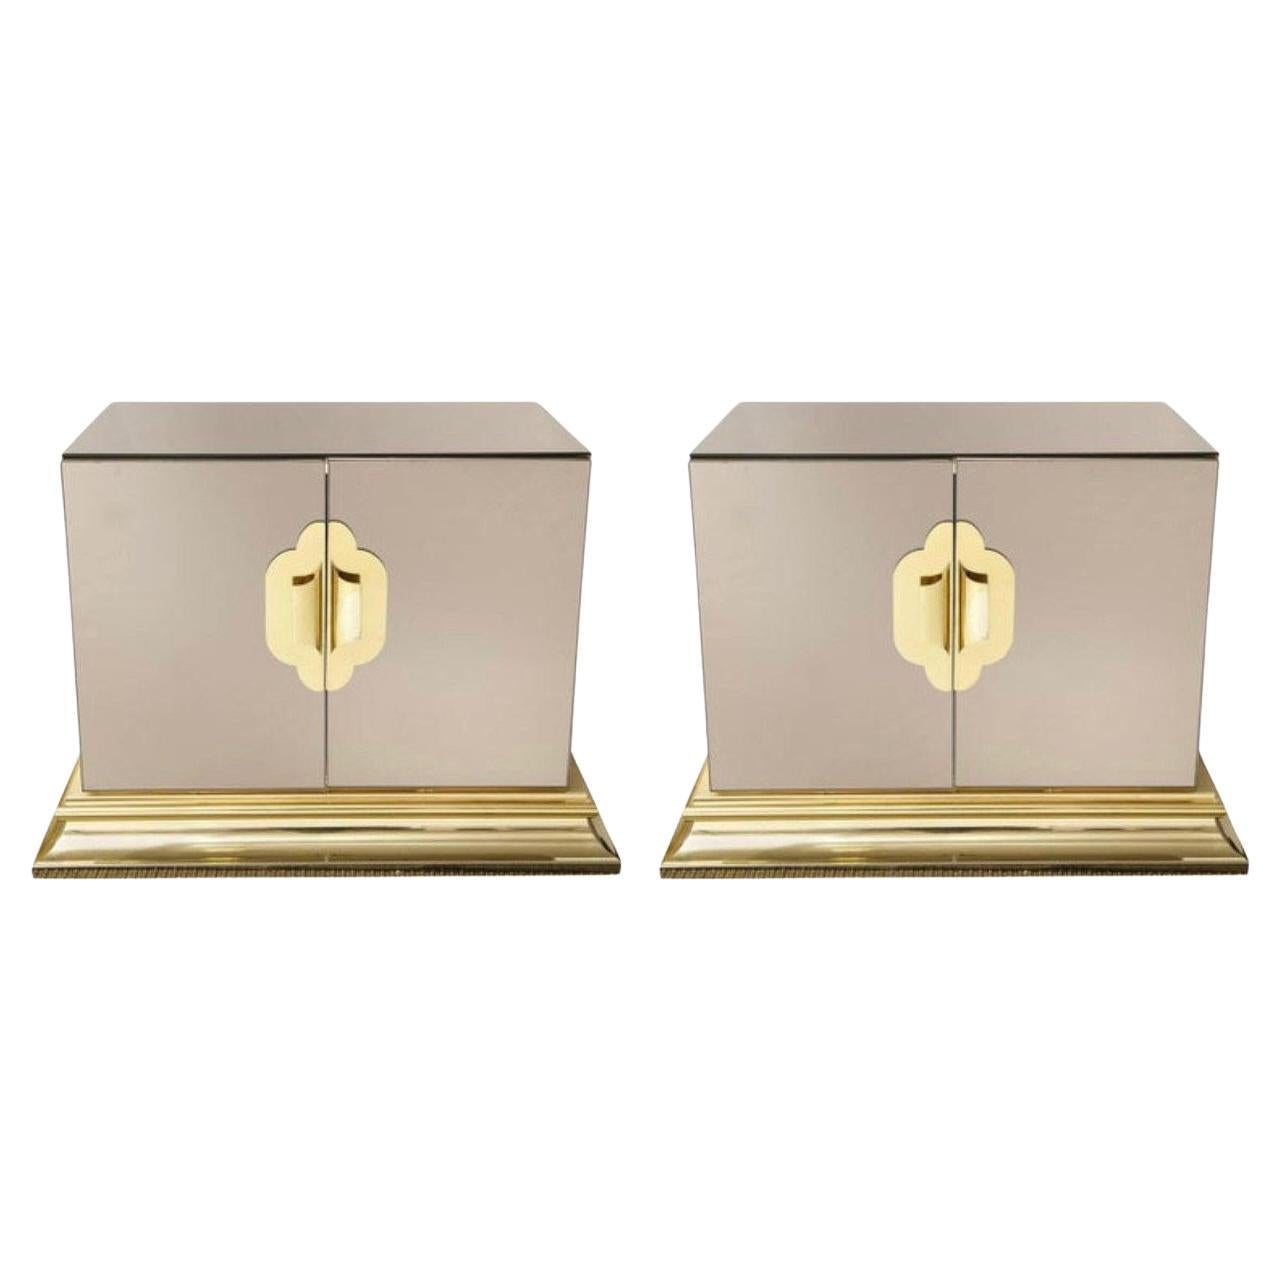 Pair of Ello Brass & Bronze Mirror Bedside Cabinets For Sale